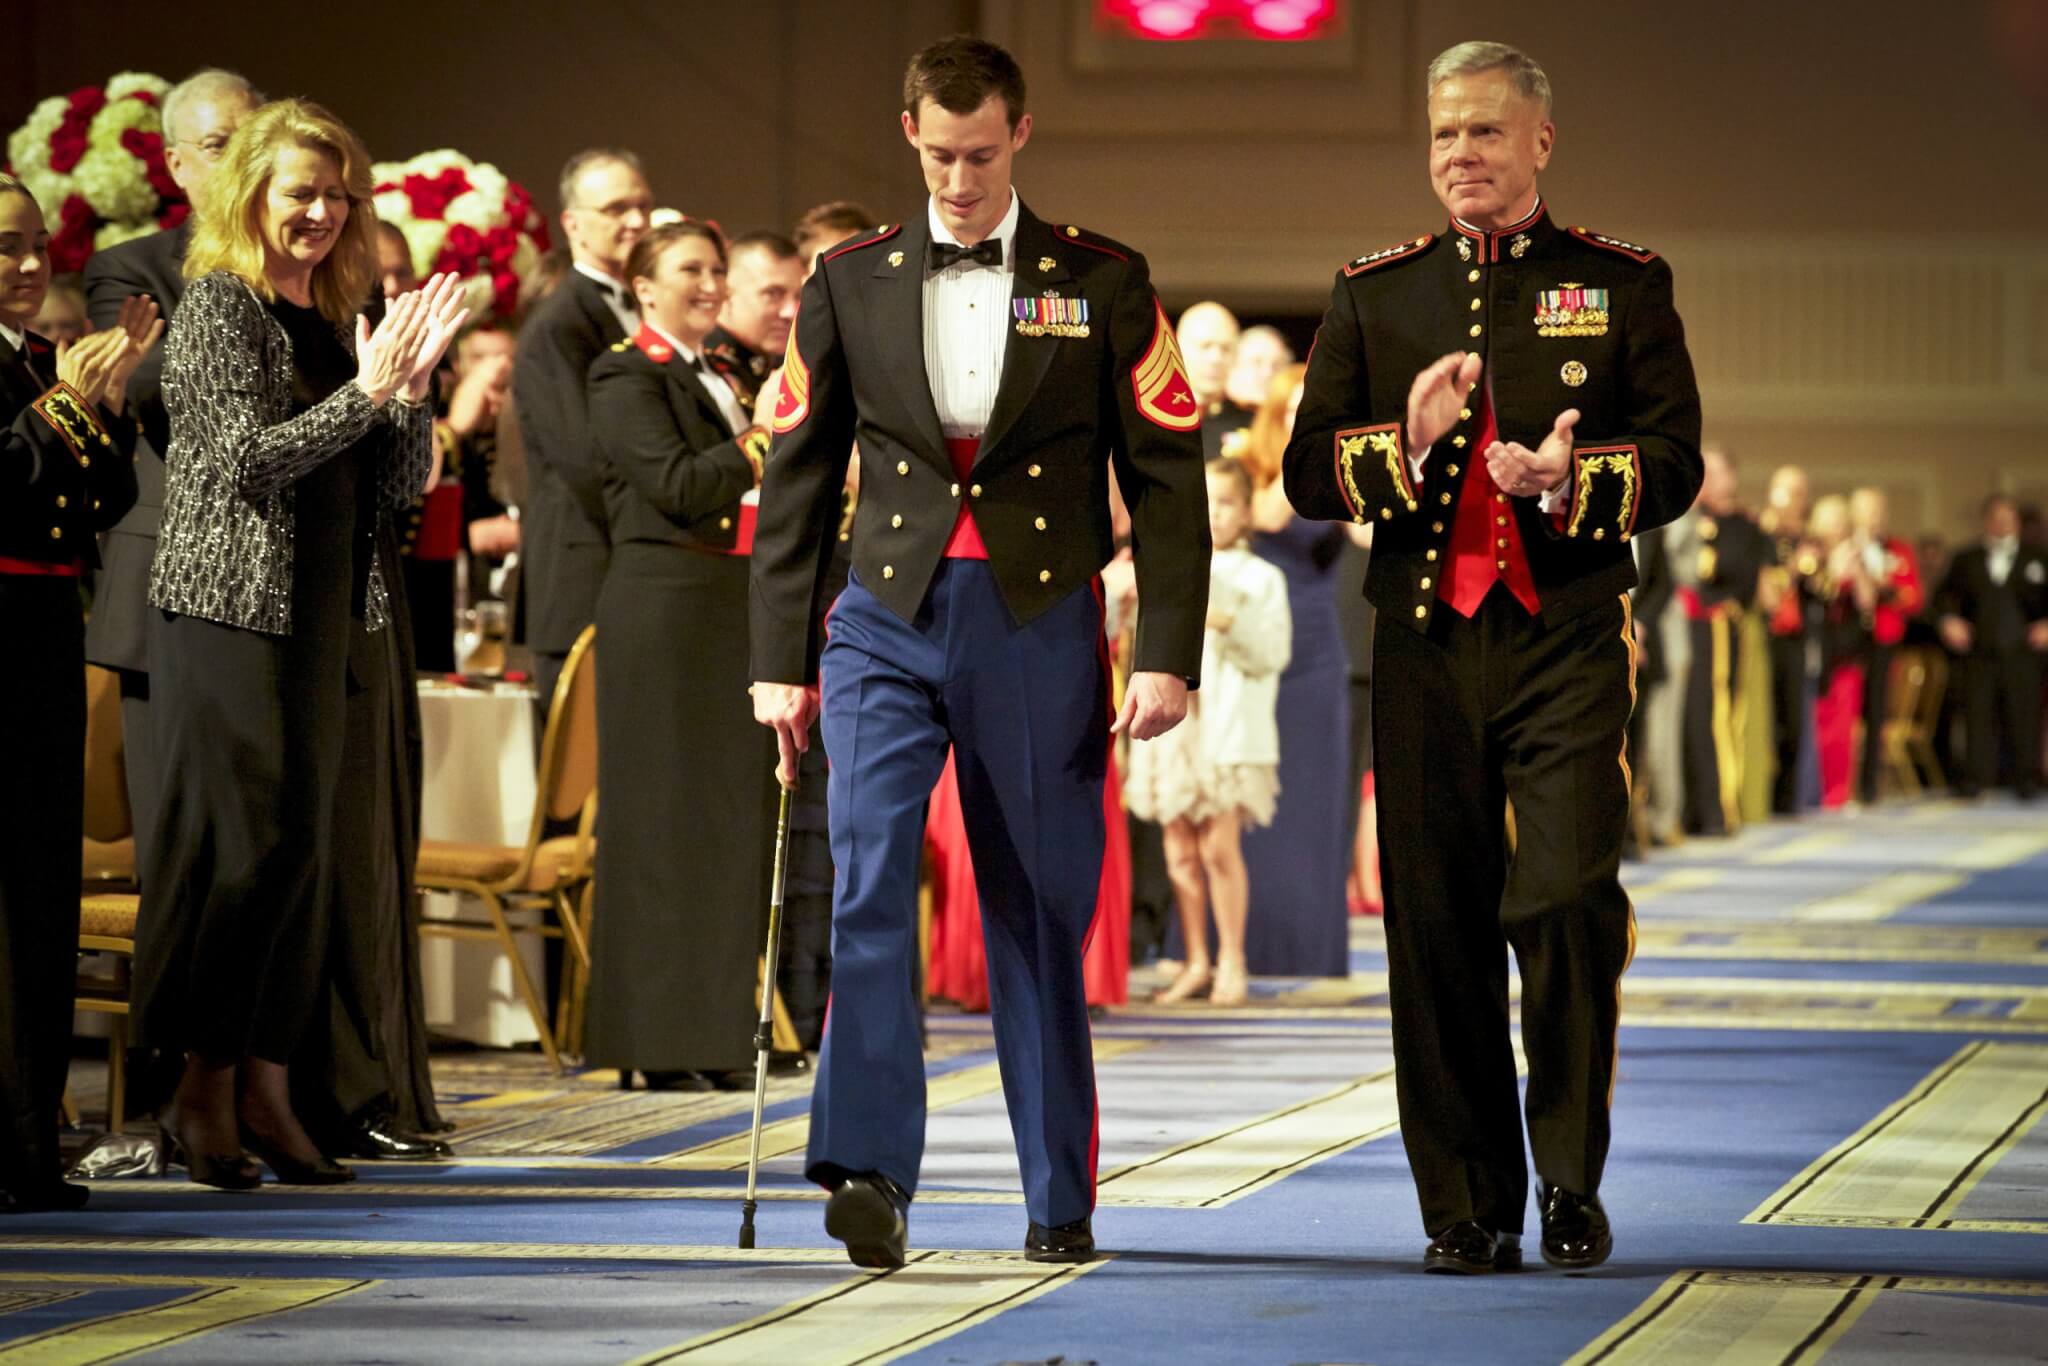 Then-Commandant of the Marine Corps Gen. James F. Amos (right), receives honors alongside Staff Sgt. Johnny Jones at the Headquarters Marine Corps Birthday Ball. Jones was on hand to represent all Wounded Warriors during the event in celebration of the 237th Marine Corps birthday. Photo by Sgt. Mallory S. VanderSchans.